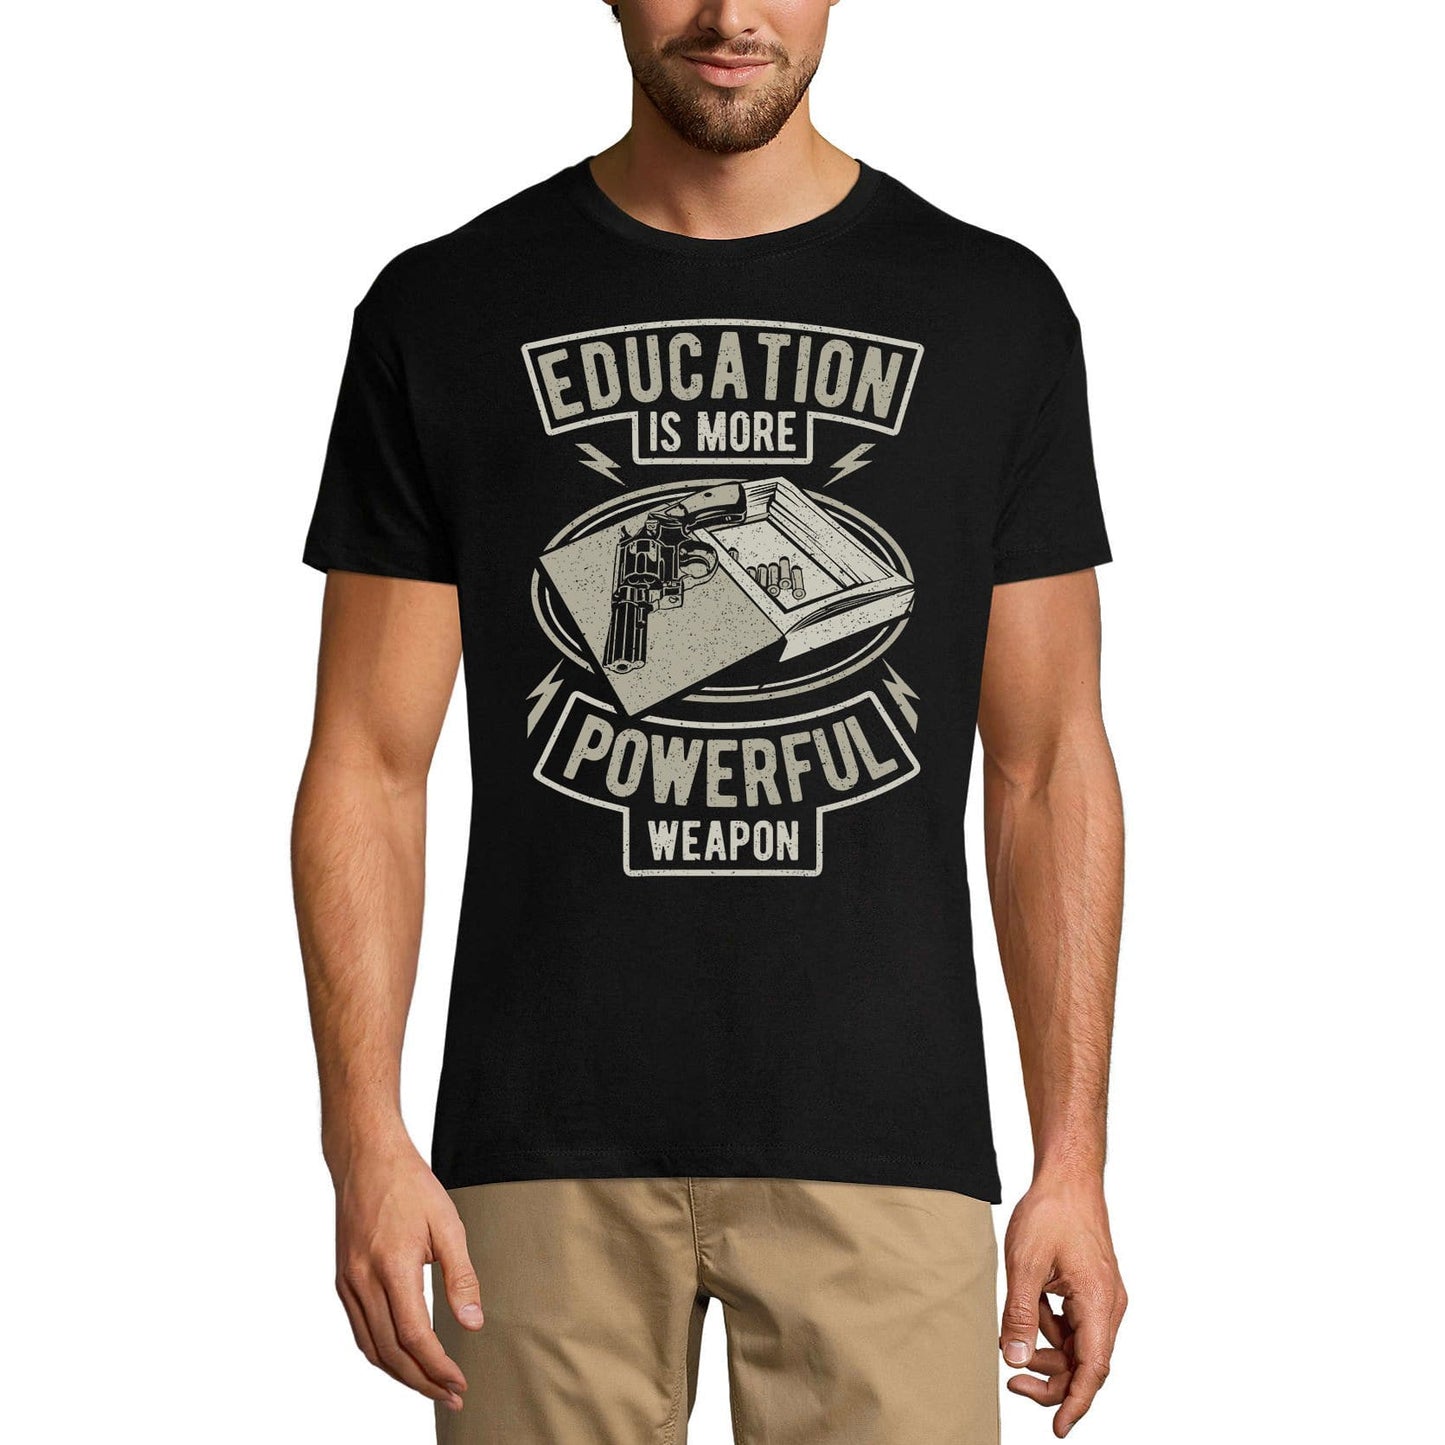 ULTRABASIC Men's Graphic T-Shirt Education Is More Powerful Weapon - Quote Shirt